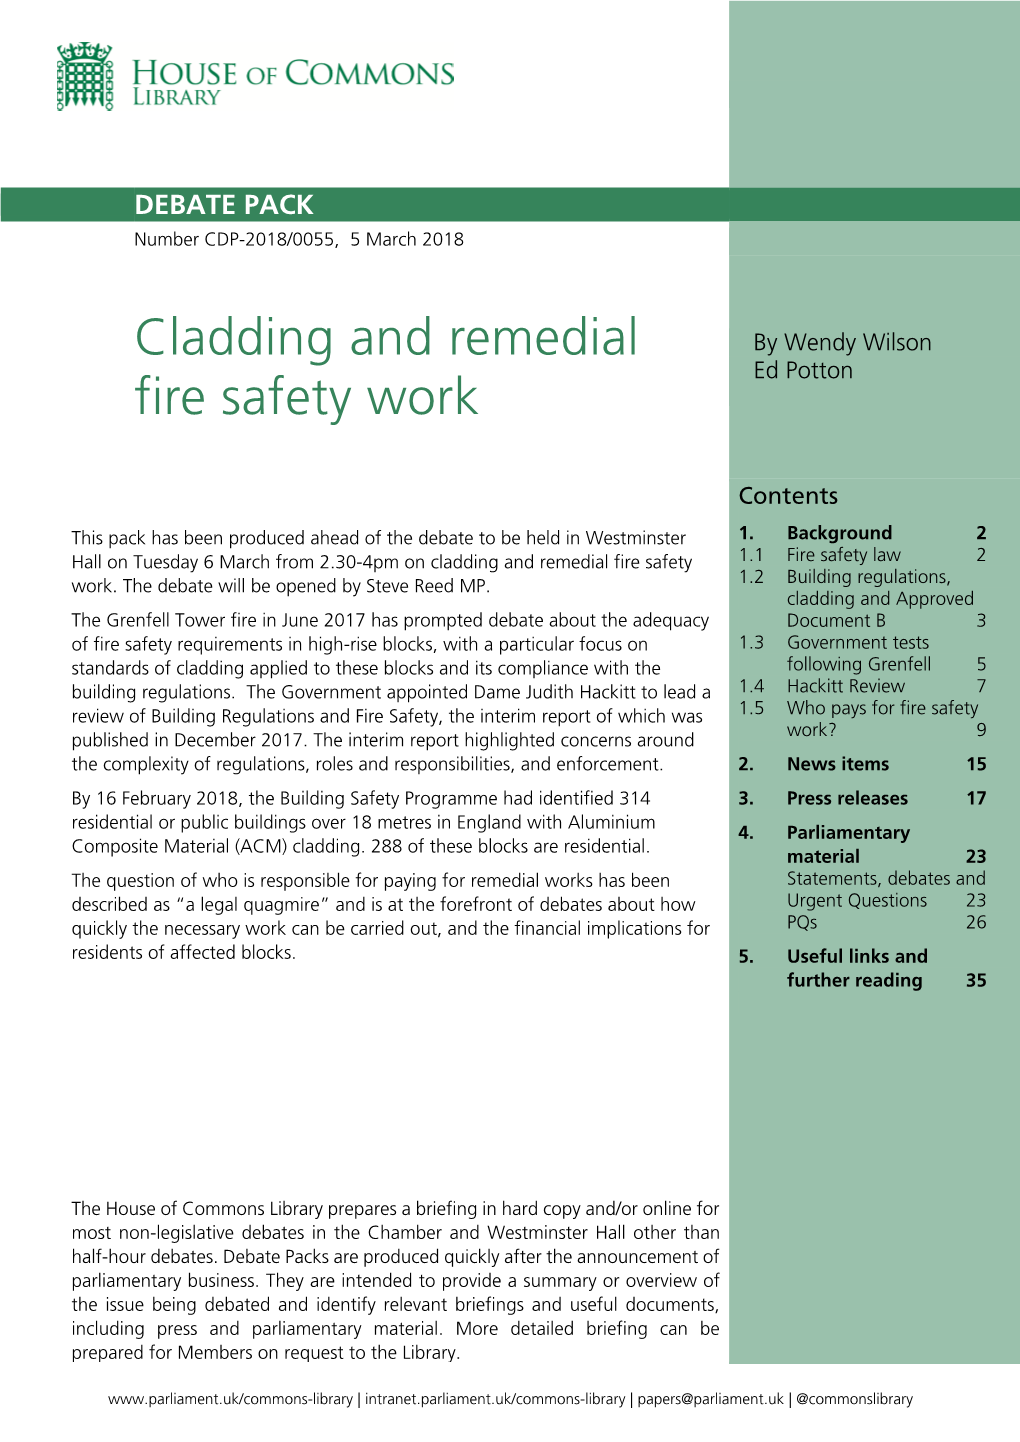 Cladding and Remedial Fire Safety Work 3